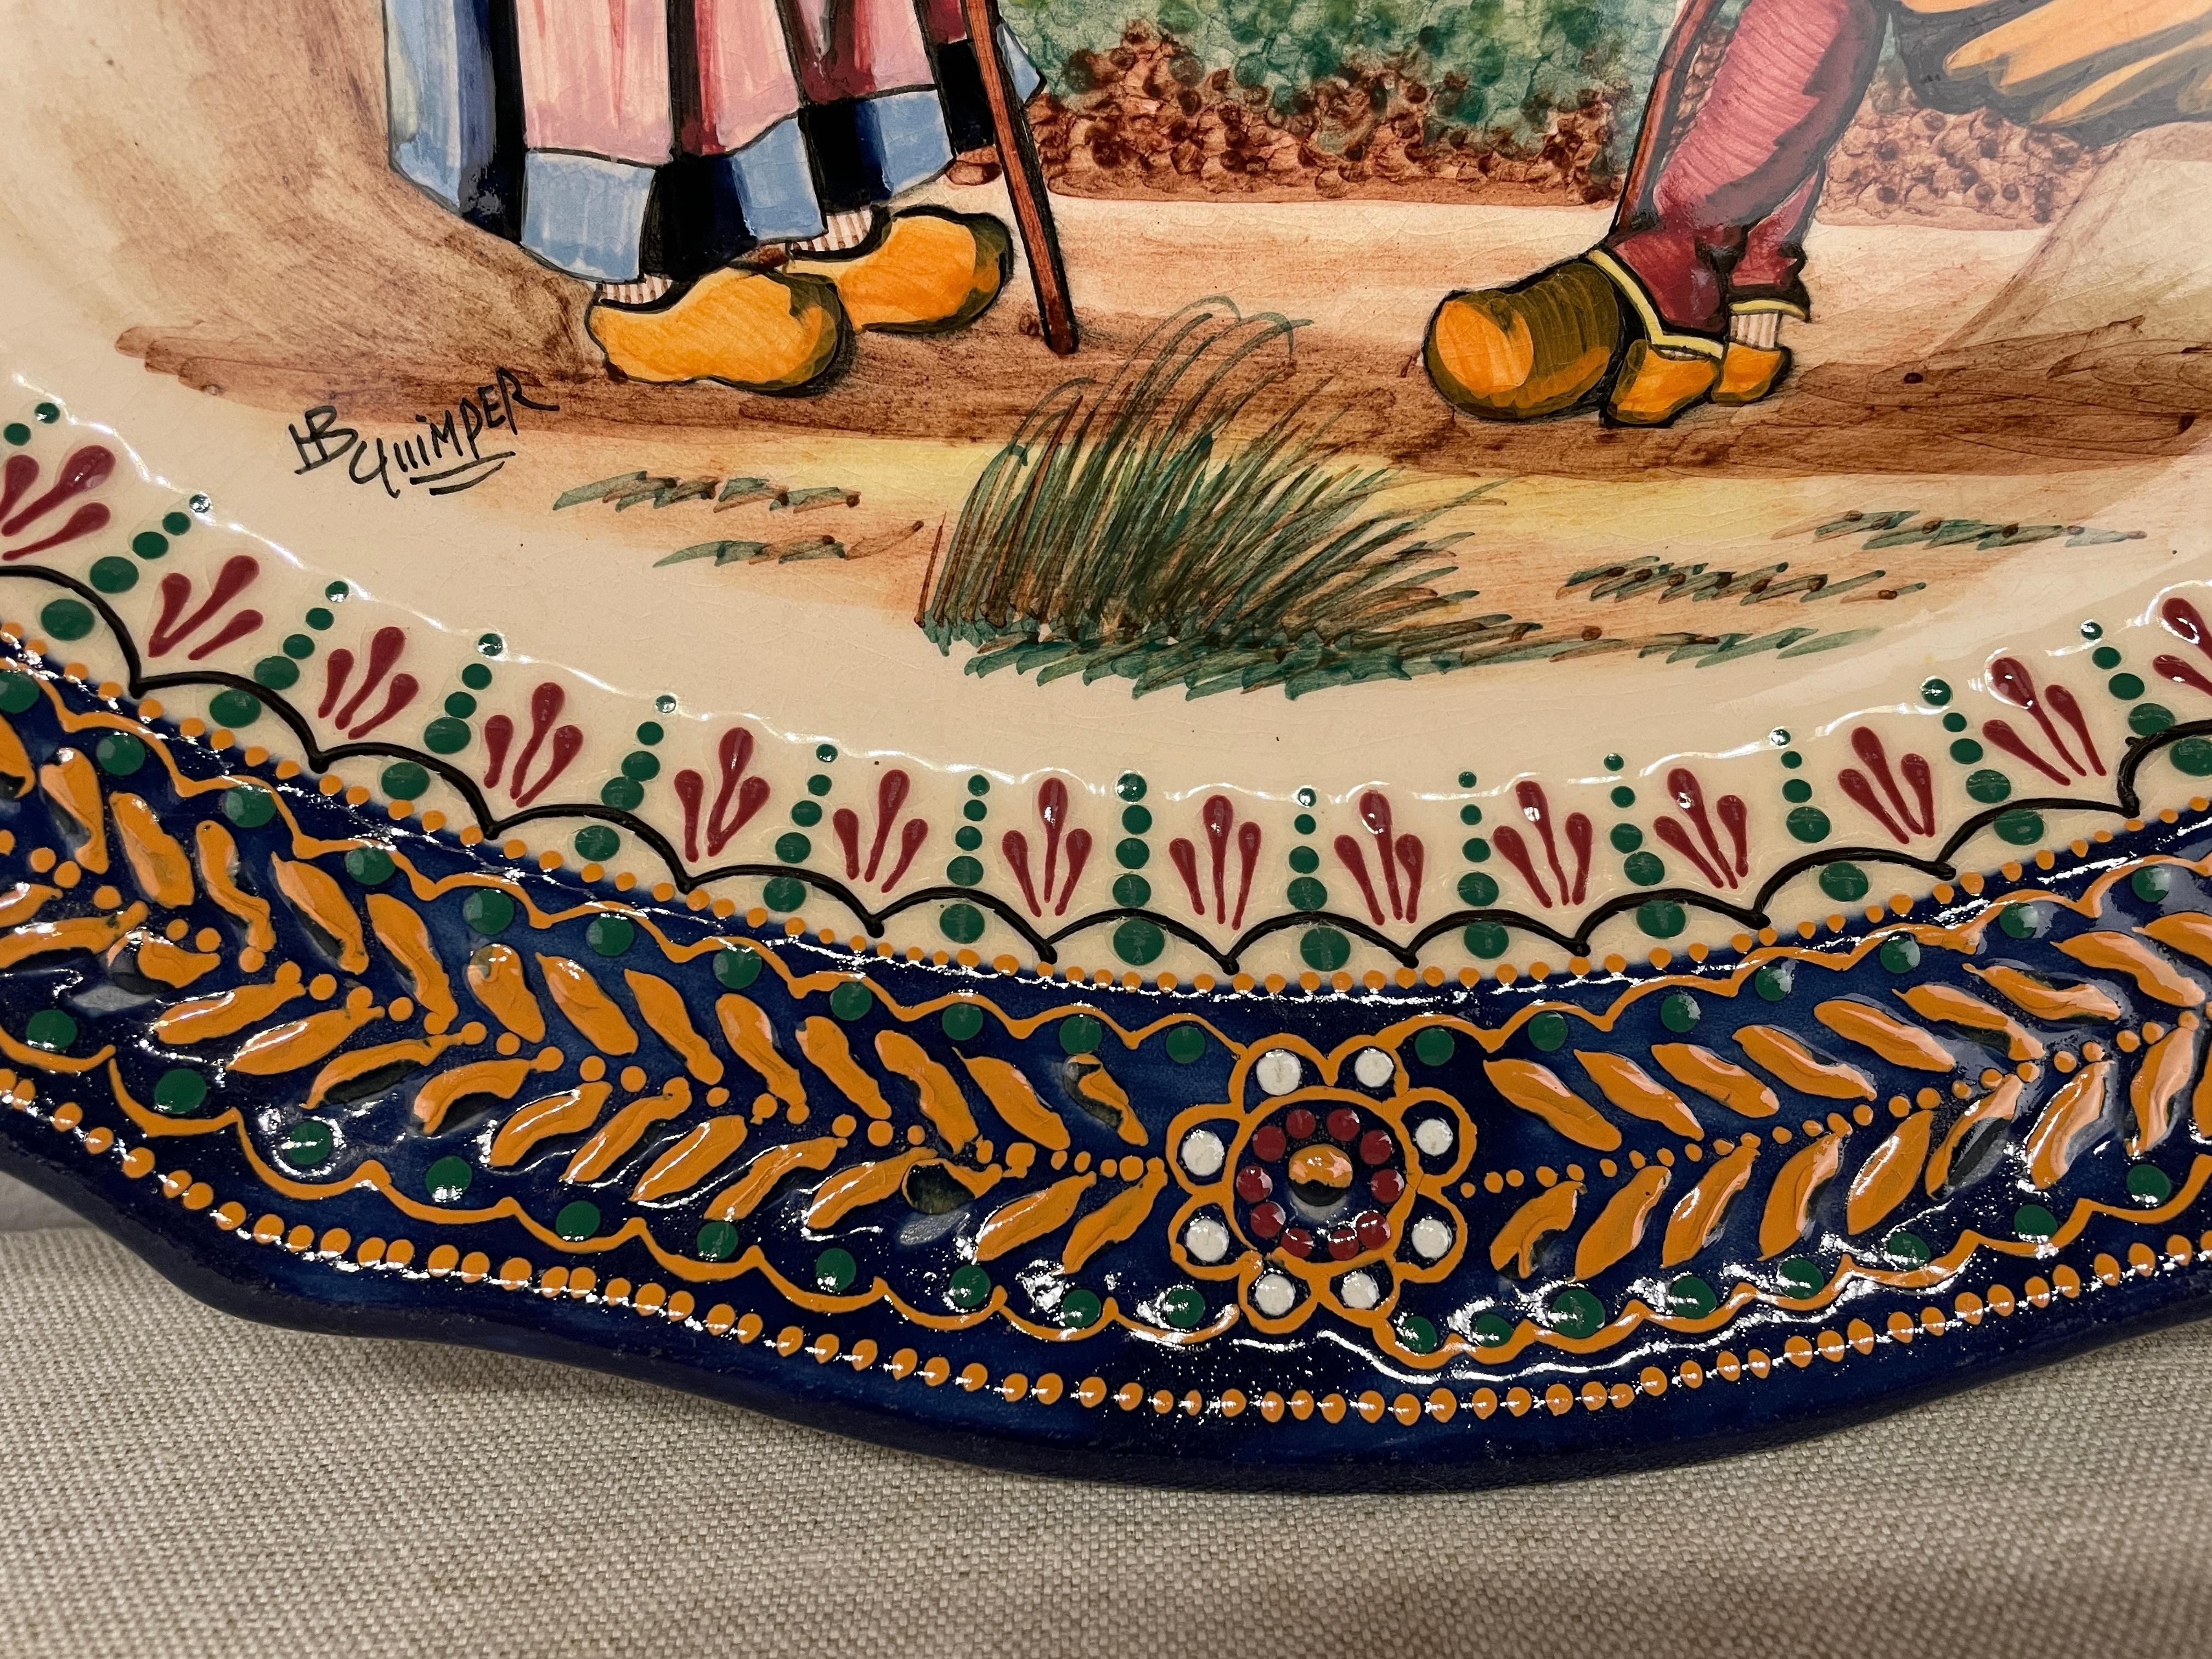 French HB Quimper Platter Broderie Border In Good Condition For Sale In Winter Park, FL